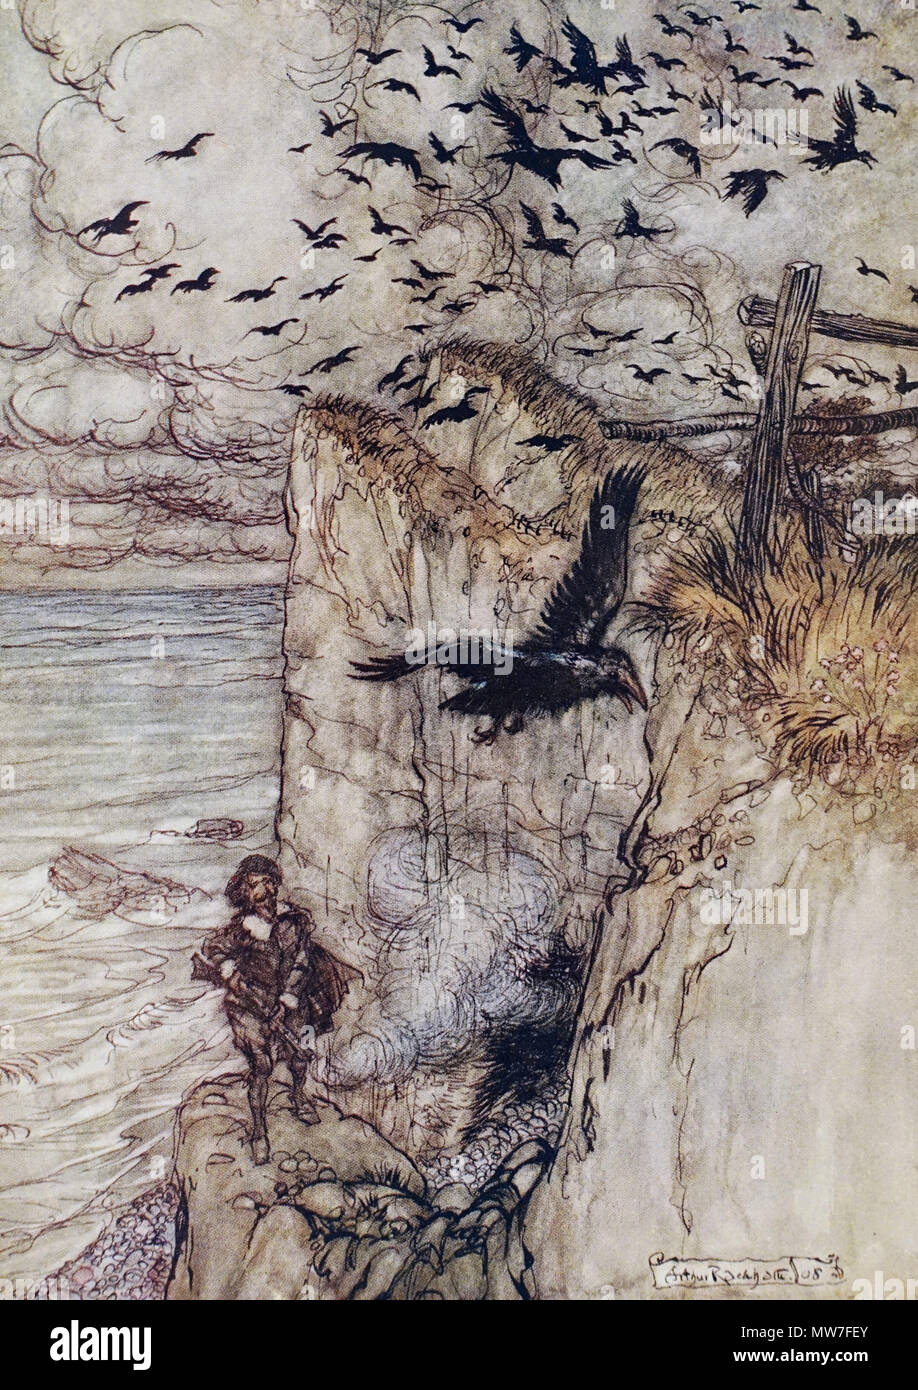 Arthur Rackham - ...russet-pated choughs, many in sort, rising and cawing at the gun's Stock Photo